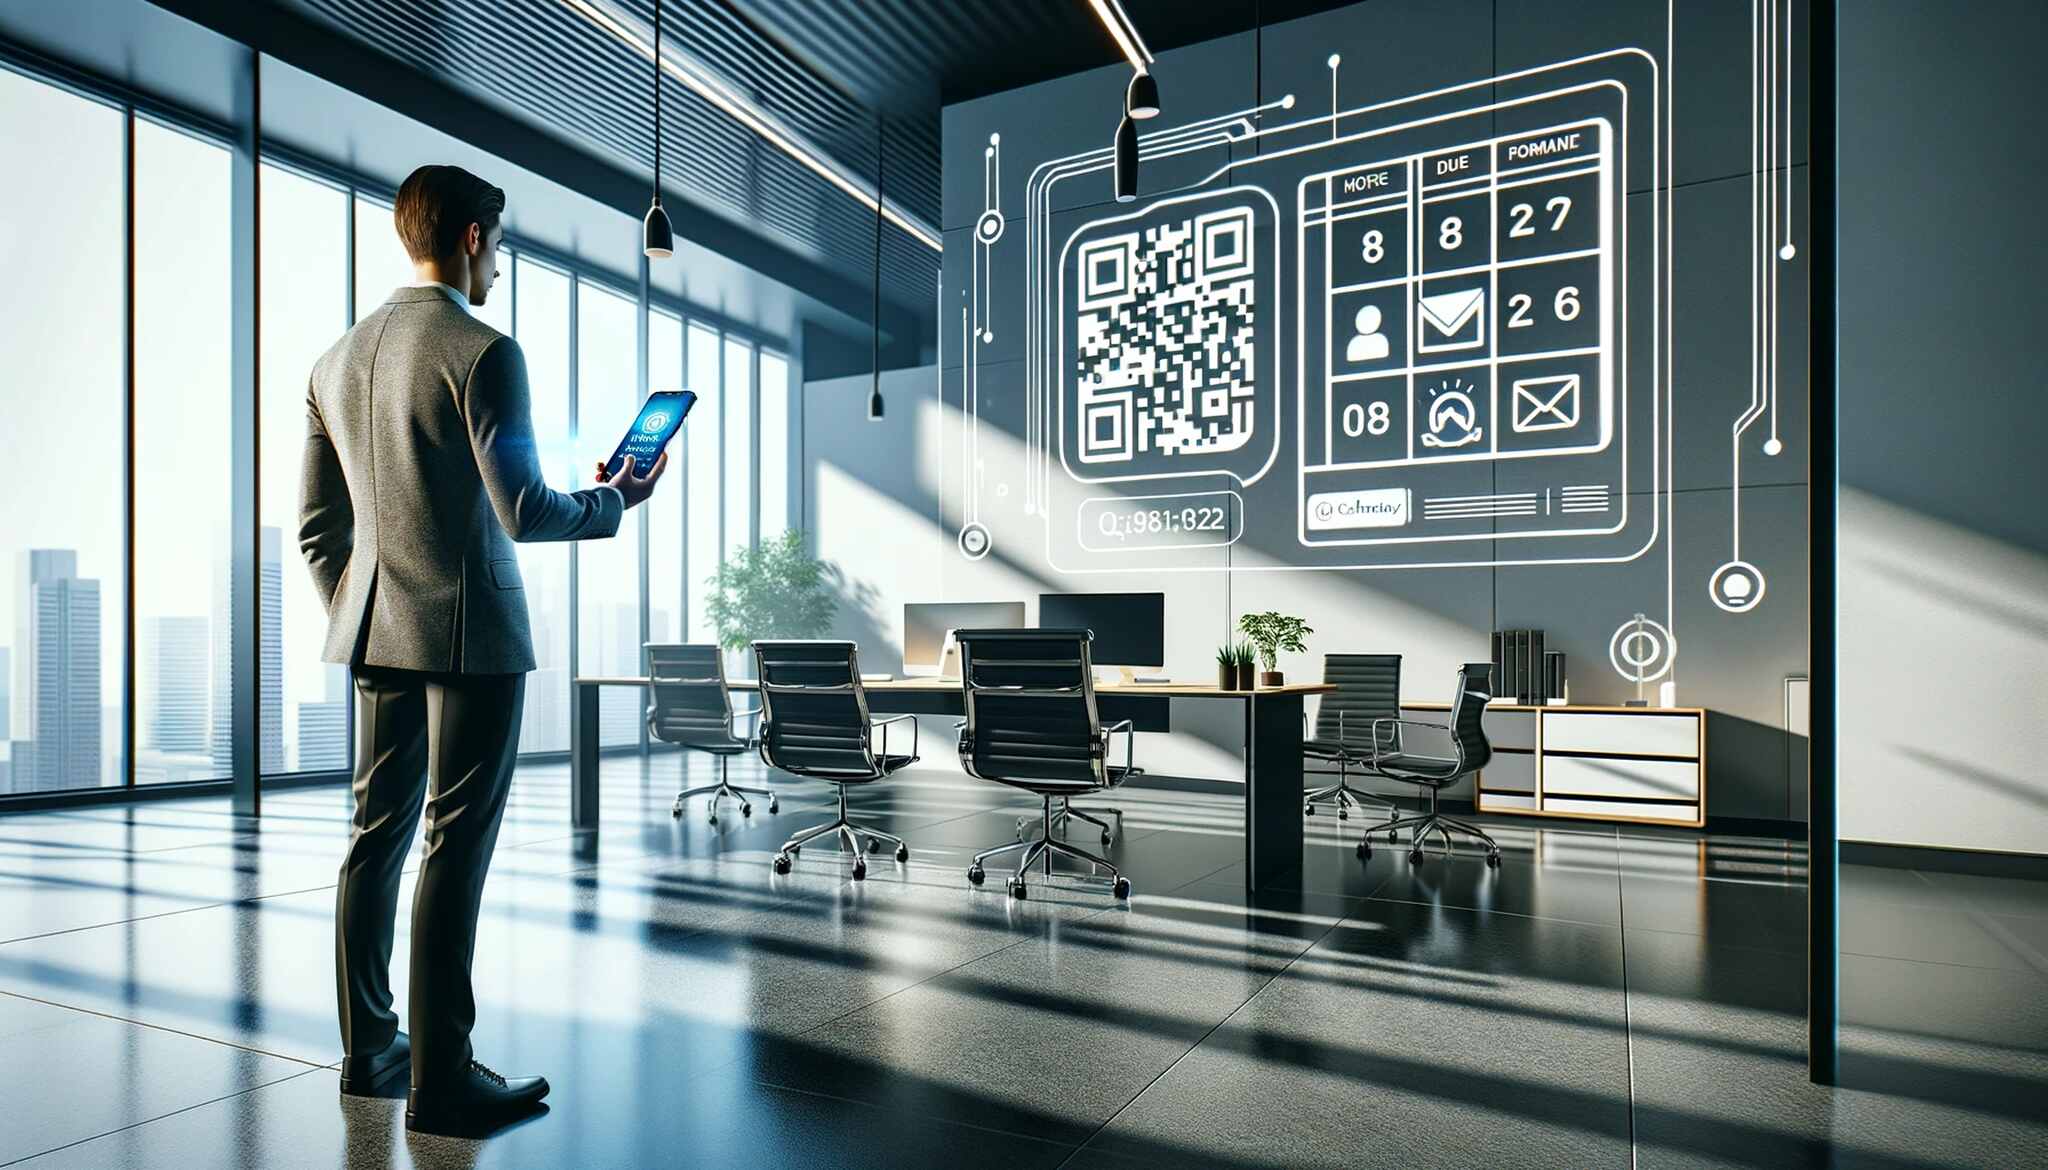 wall showing a calendar interface with QR code, and a man checking his phone